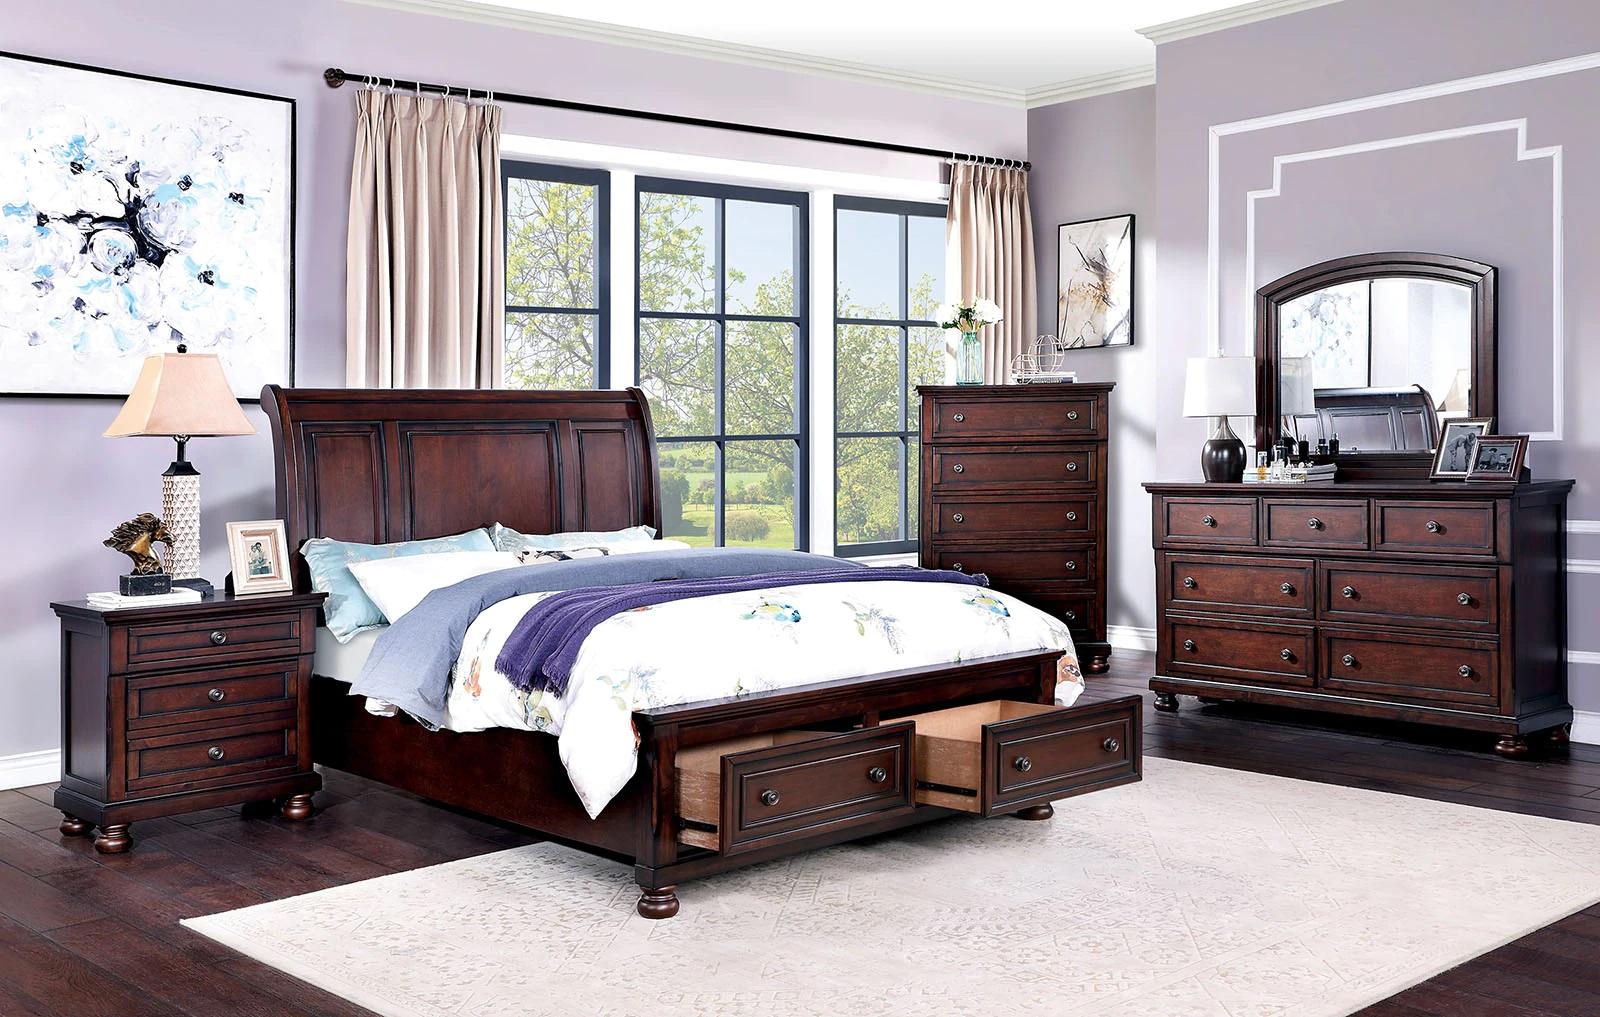 

    
Transitional Dark Cherry Solid Wood Queen Bedroom Set 5pcs Furniture of America CM7548CH-DR Wells
